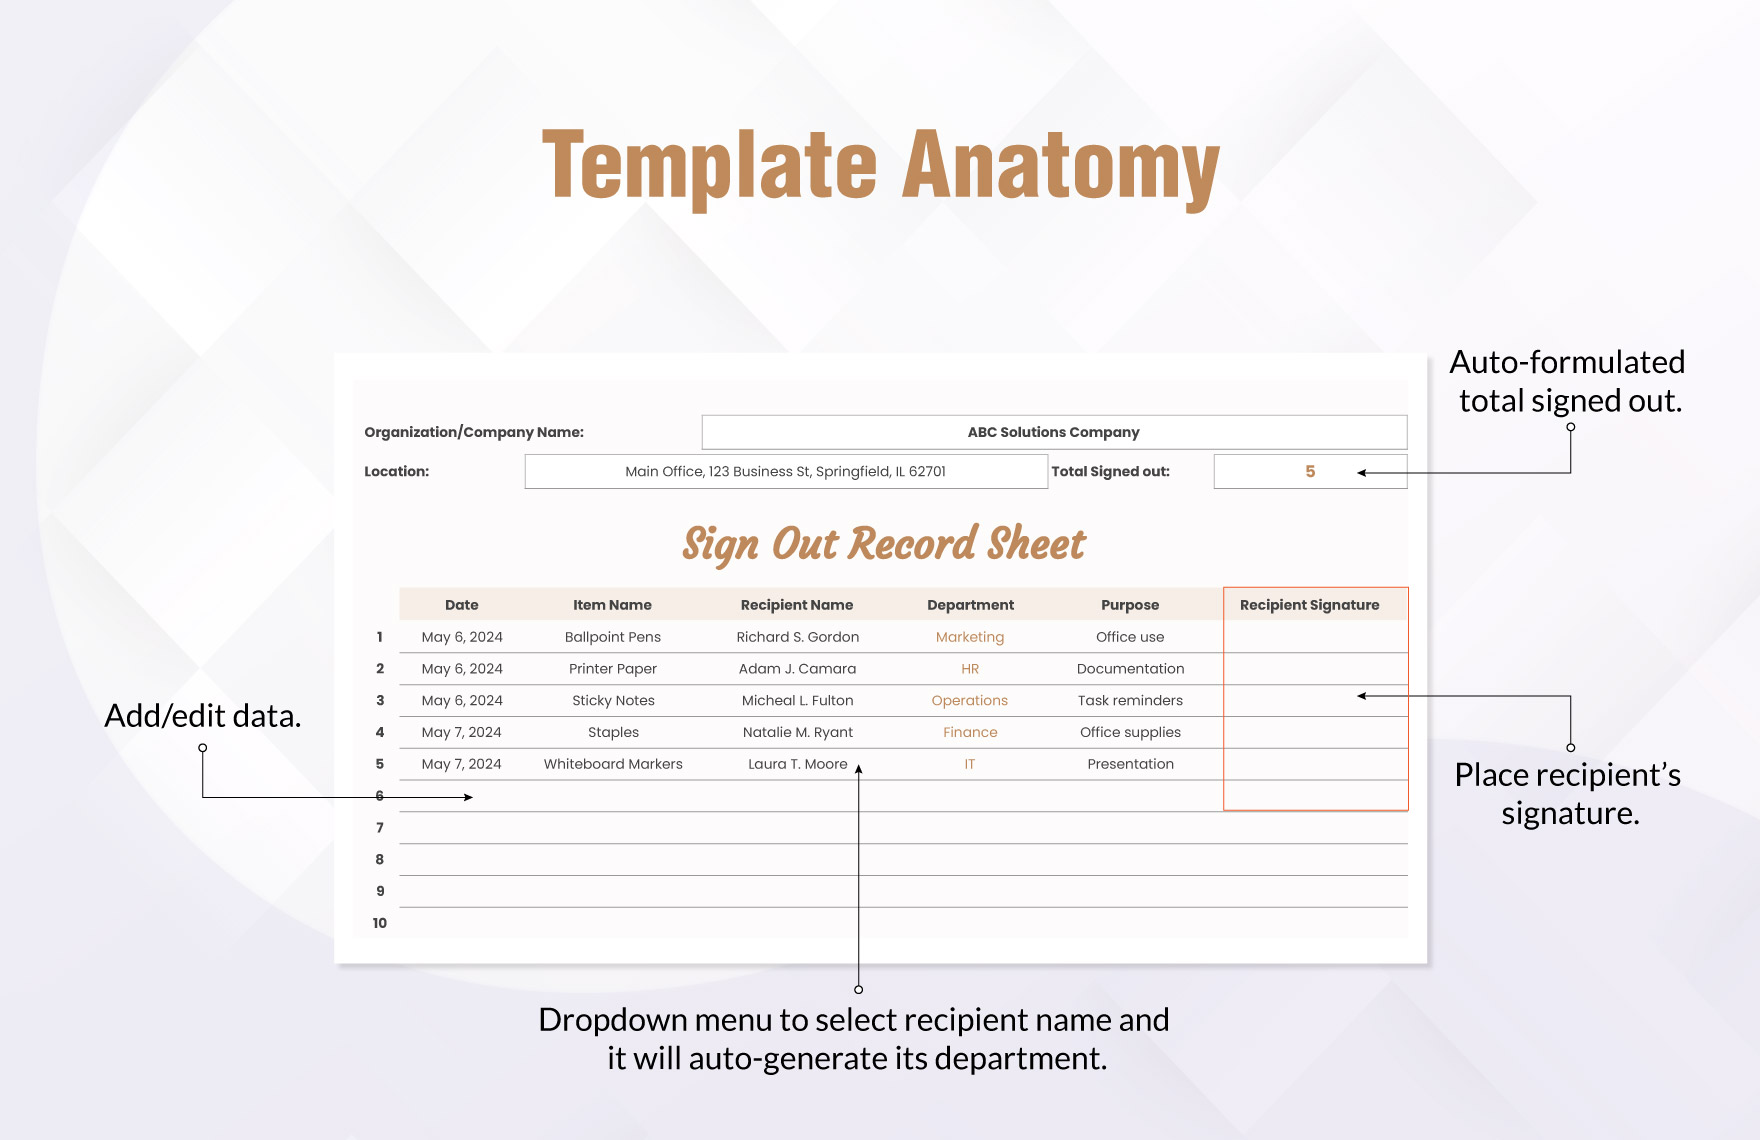 Sign Out Record Sheet Template